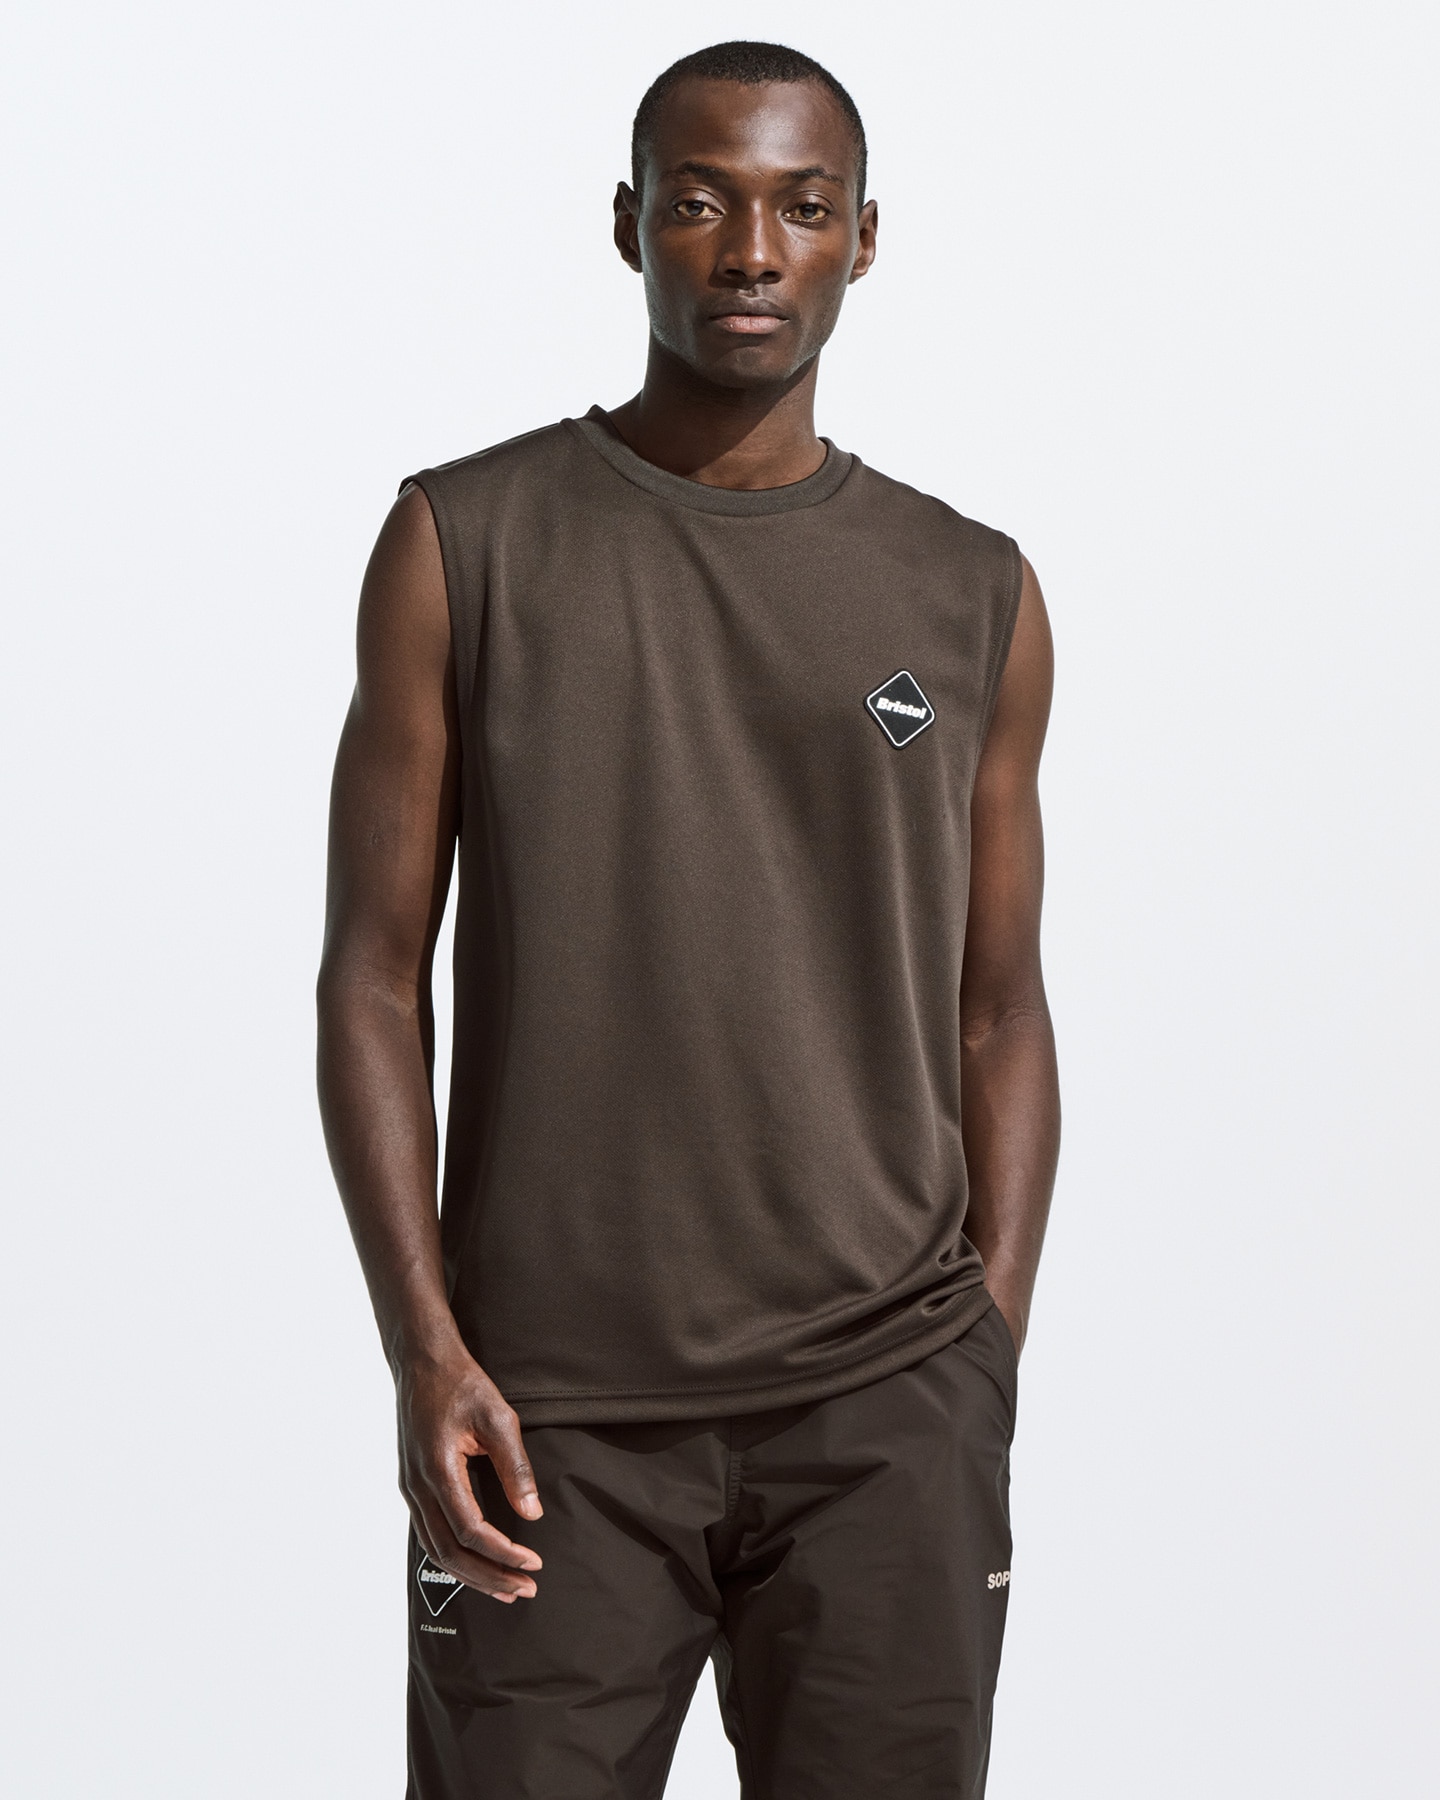 SOPH. | NO SLEEVE TRAINING TOP(S BROWN):